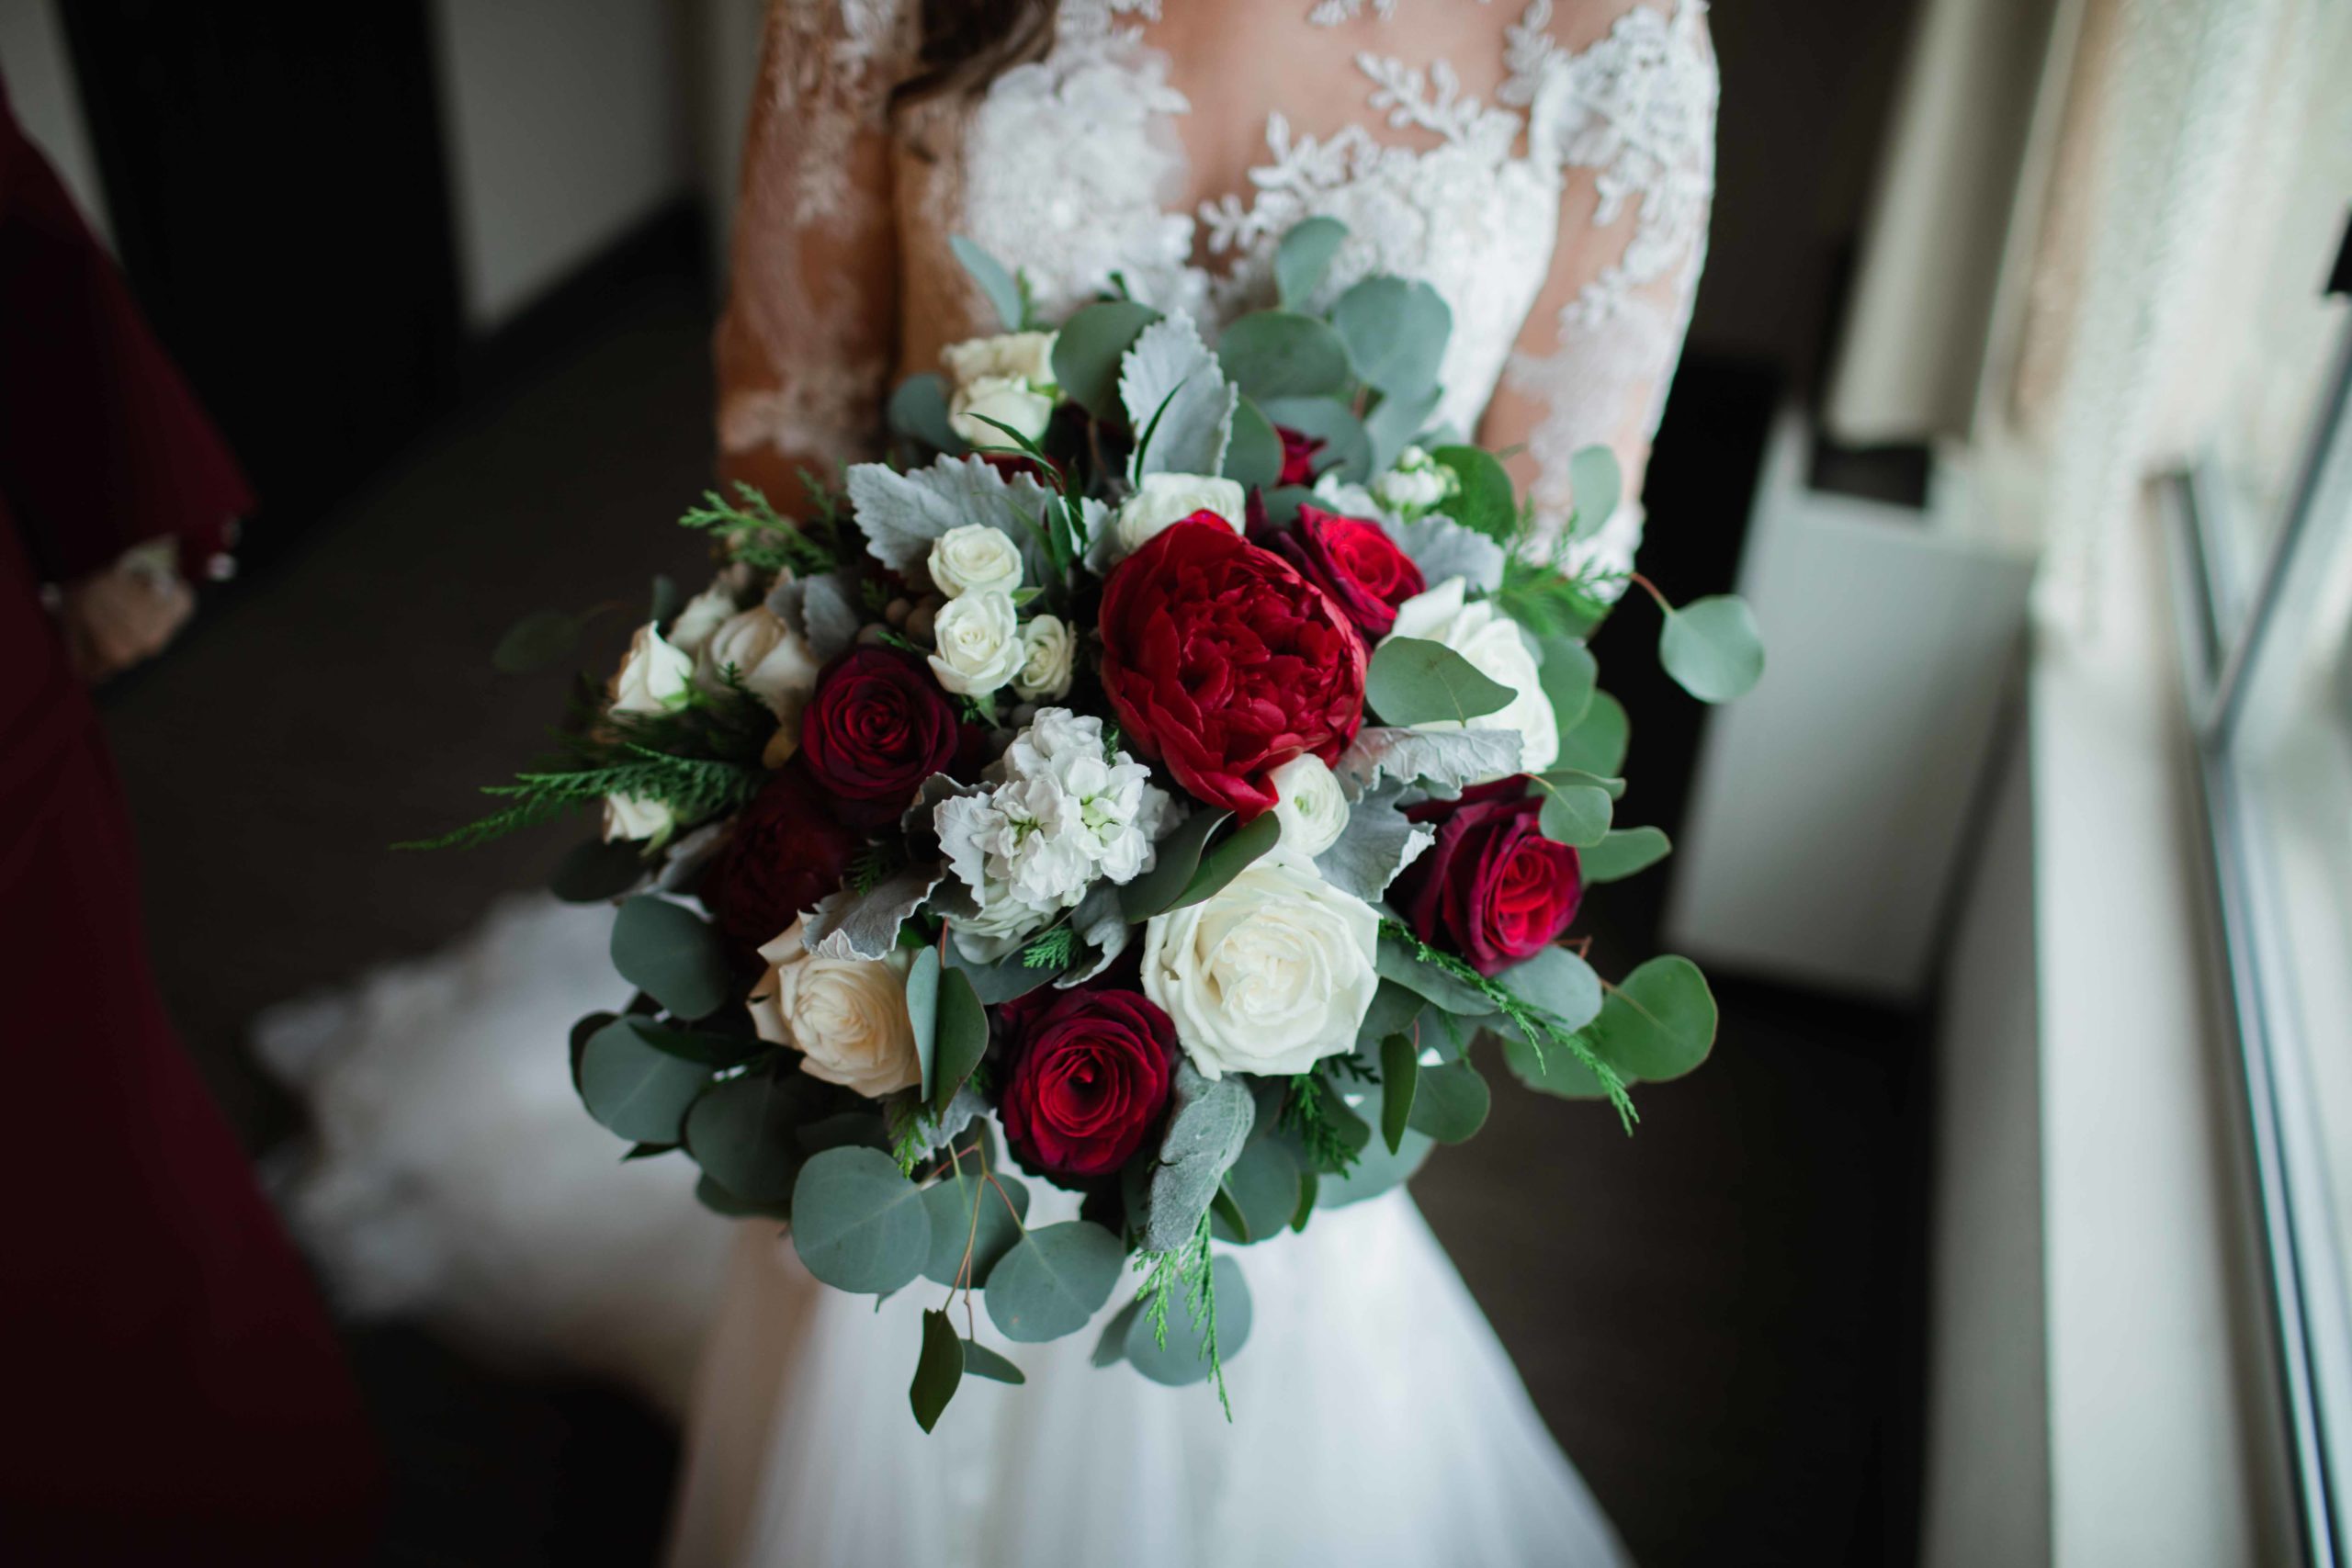 Hotel Baker Winter Wedding Photography Saint Charles Illinois Red and White Floral Bouquet